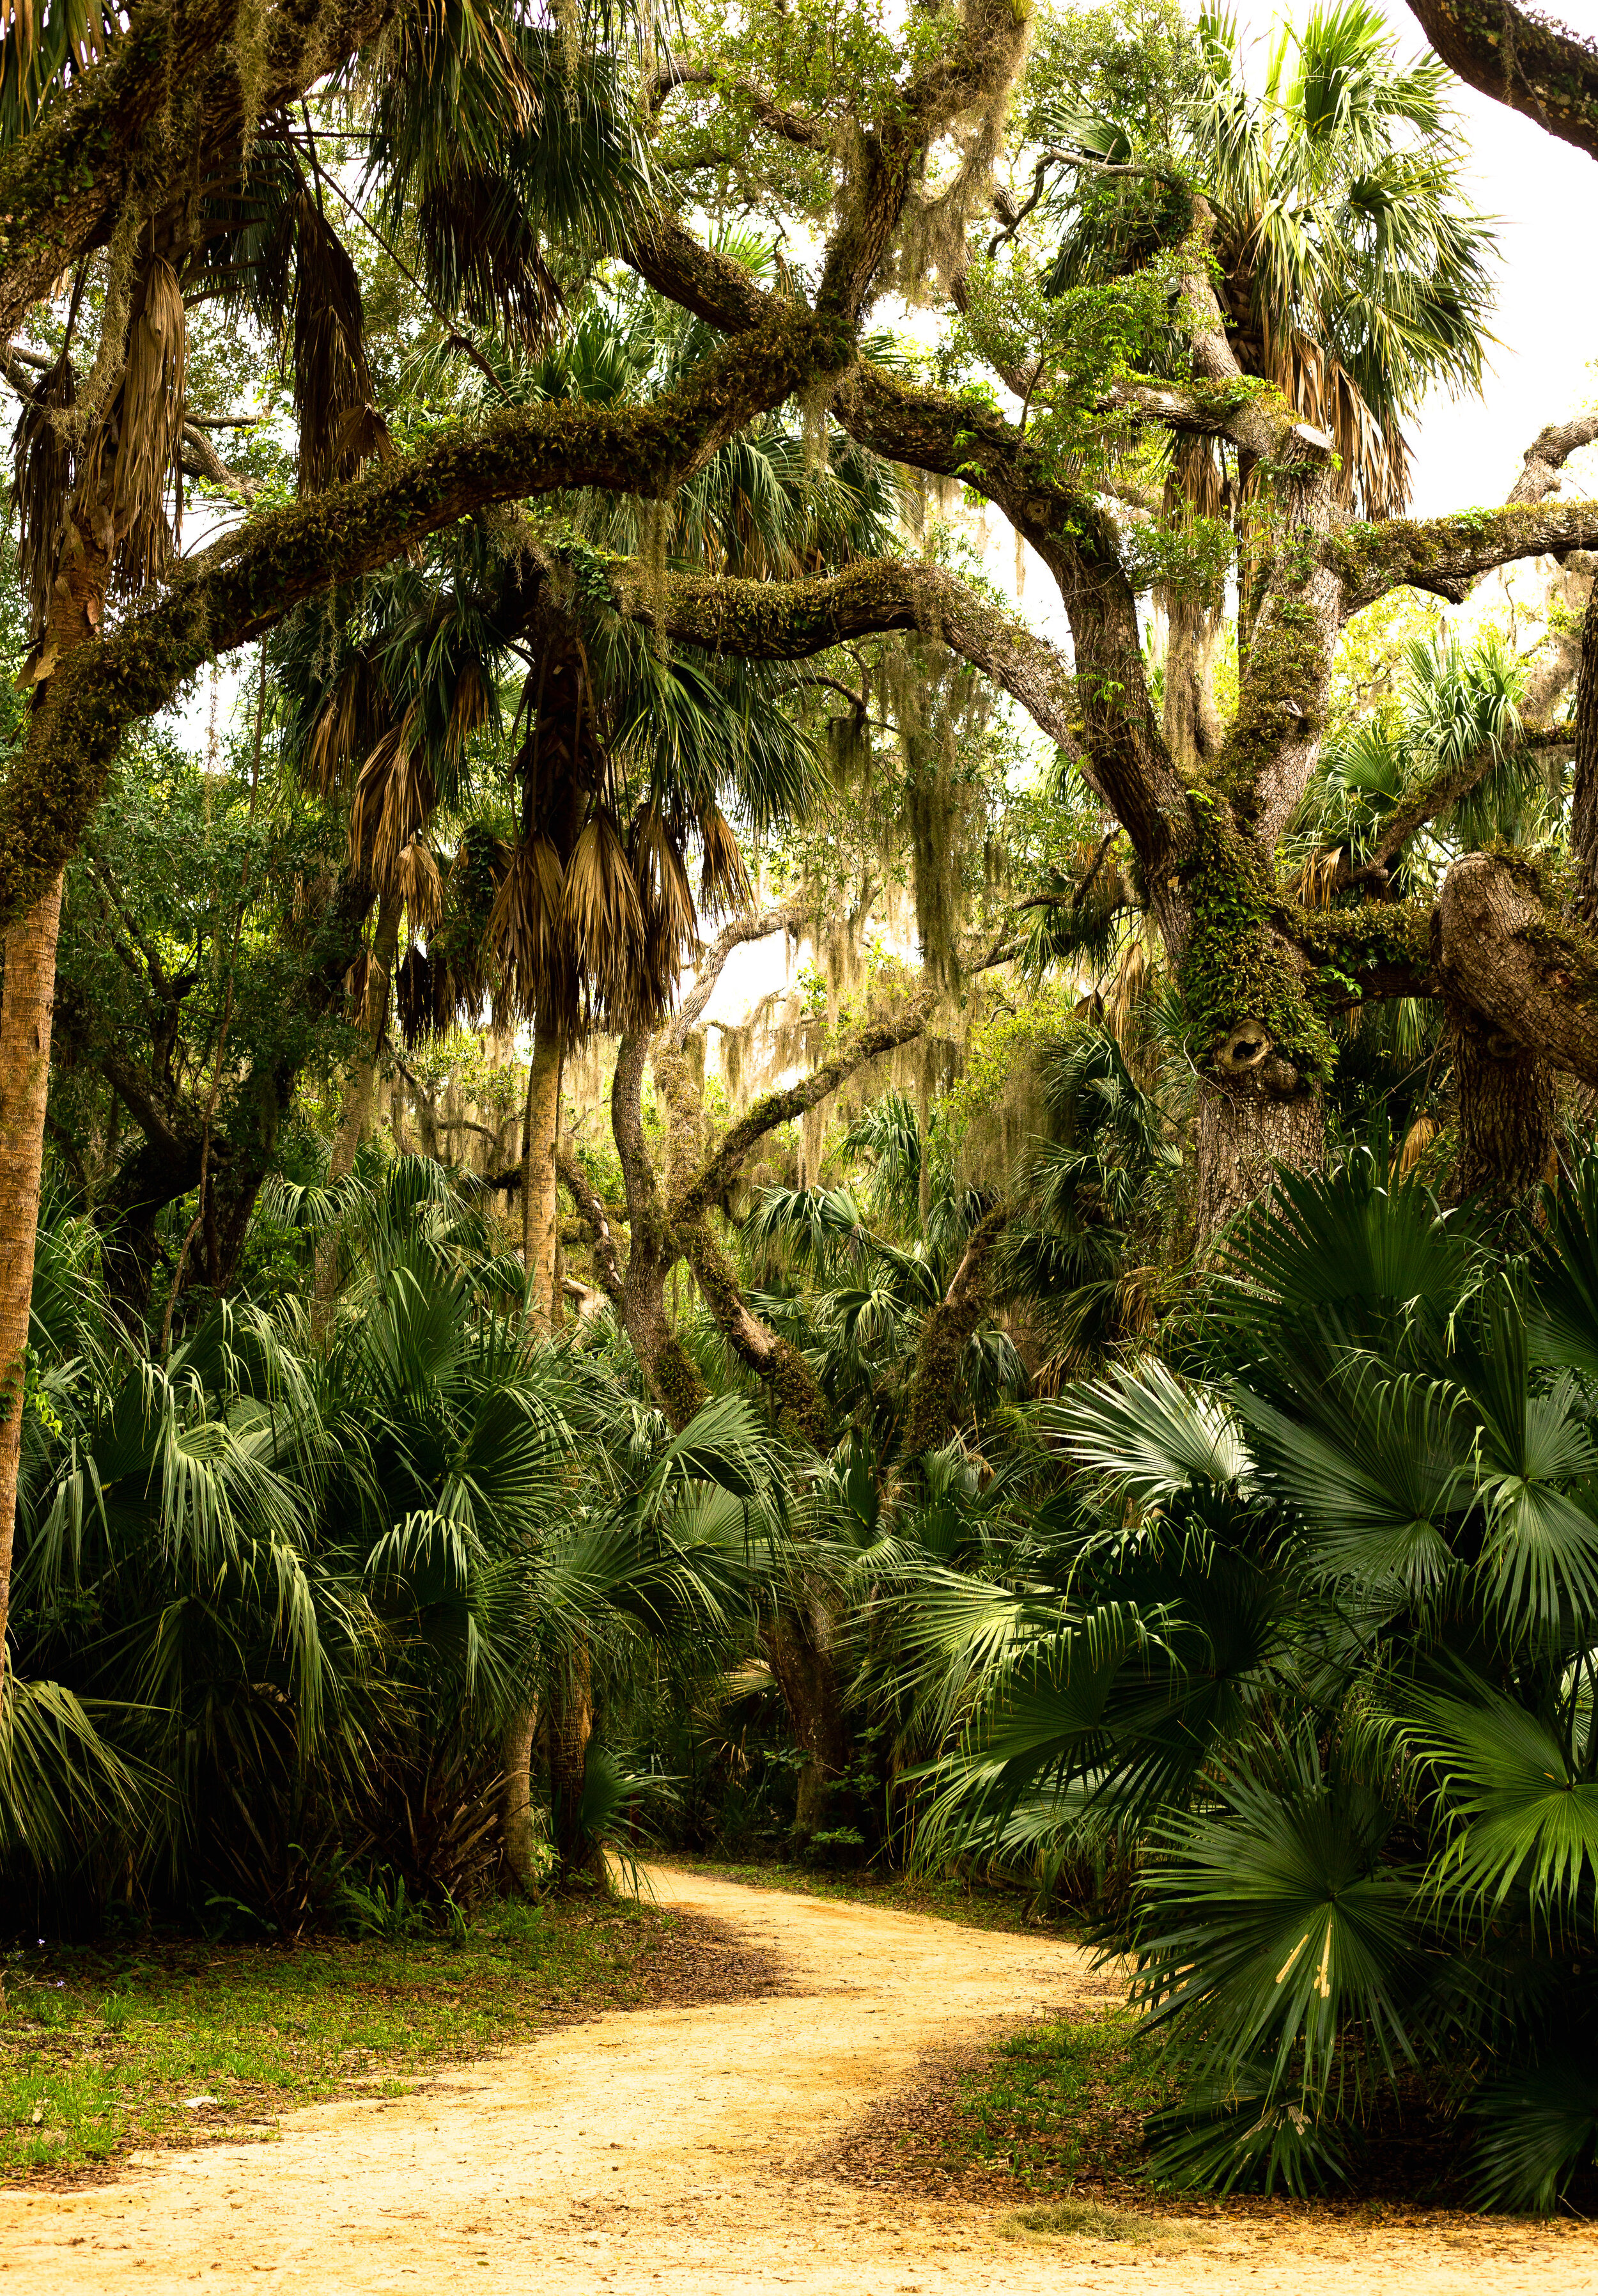 7 local parks to explore in Central Florida — LemonHearted